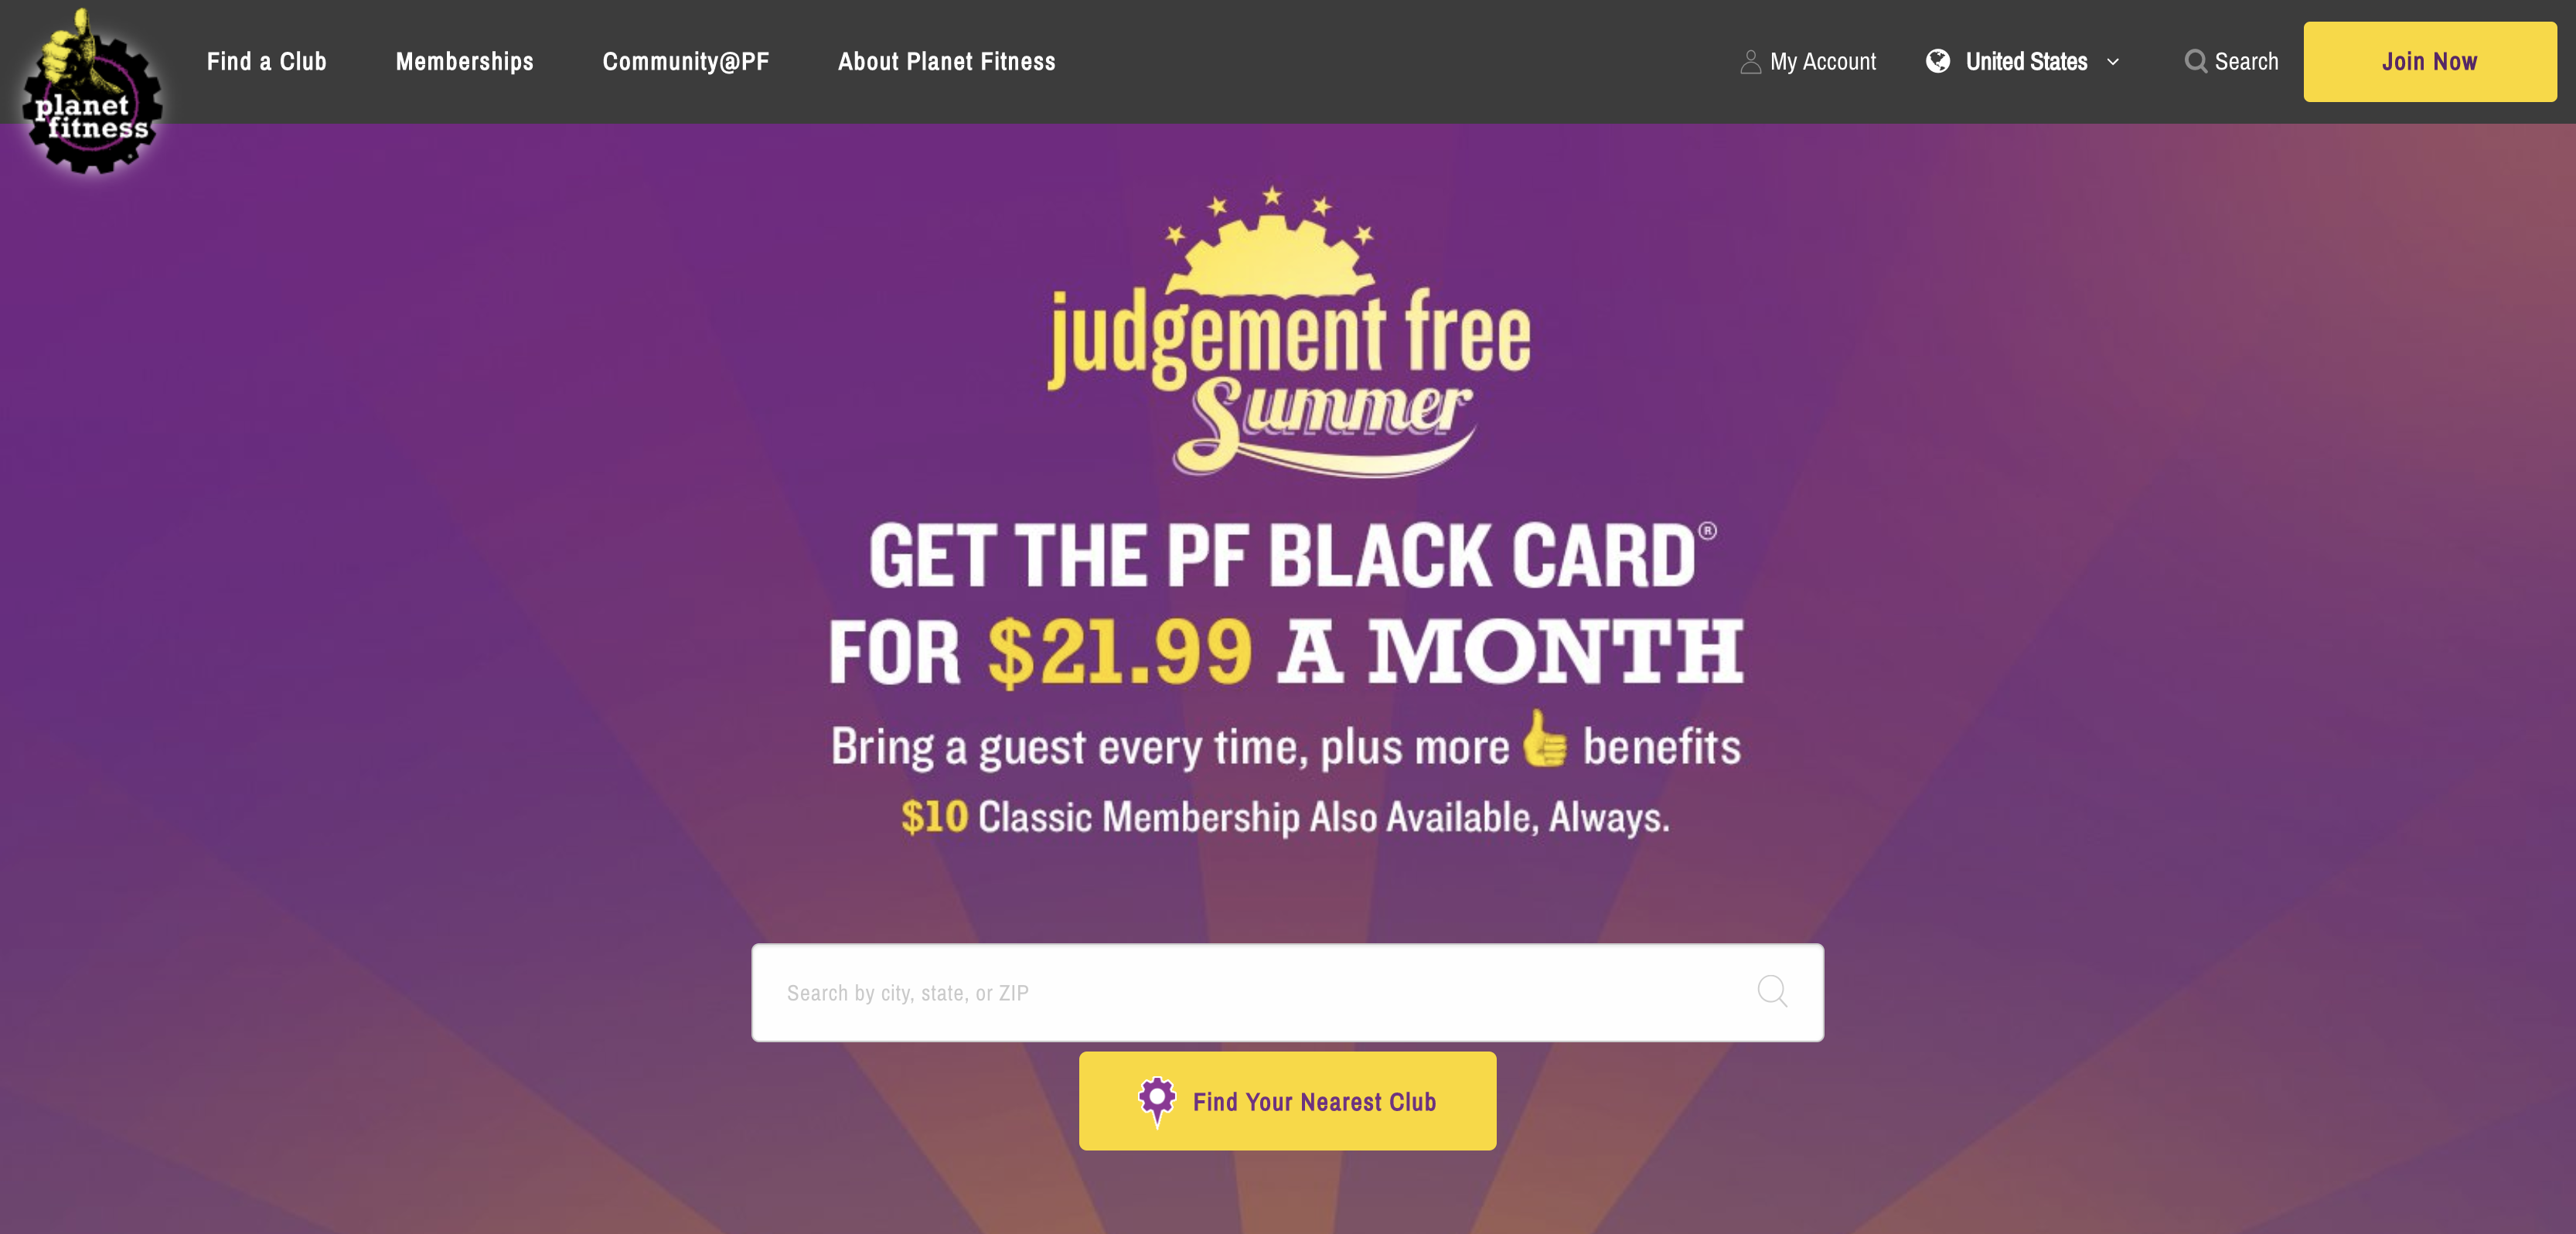 6 Day Planet Fitness Monthly Fees for Build Muscle